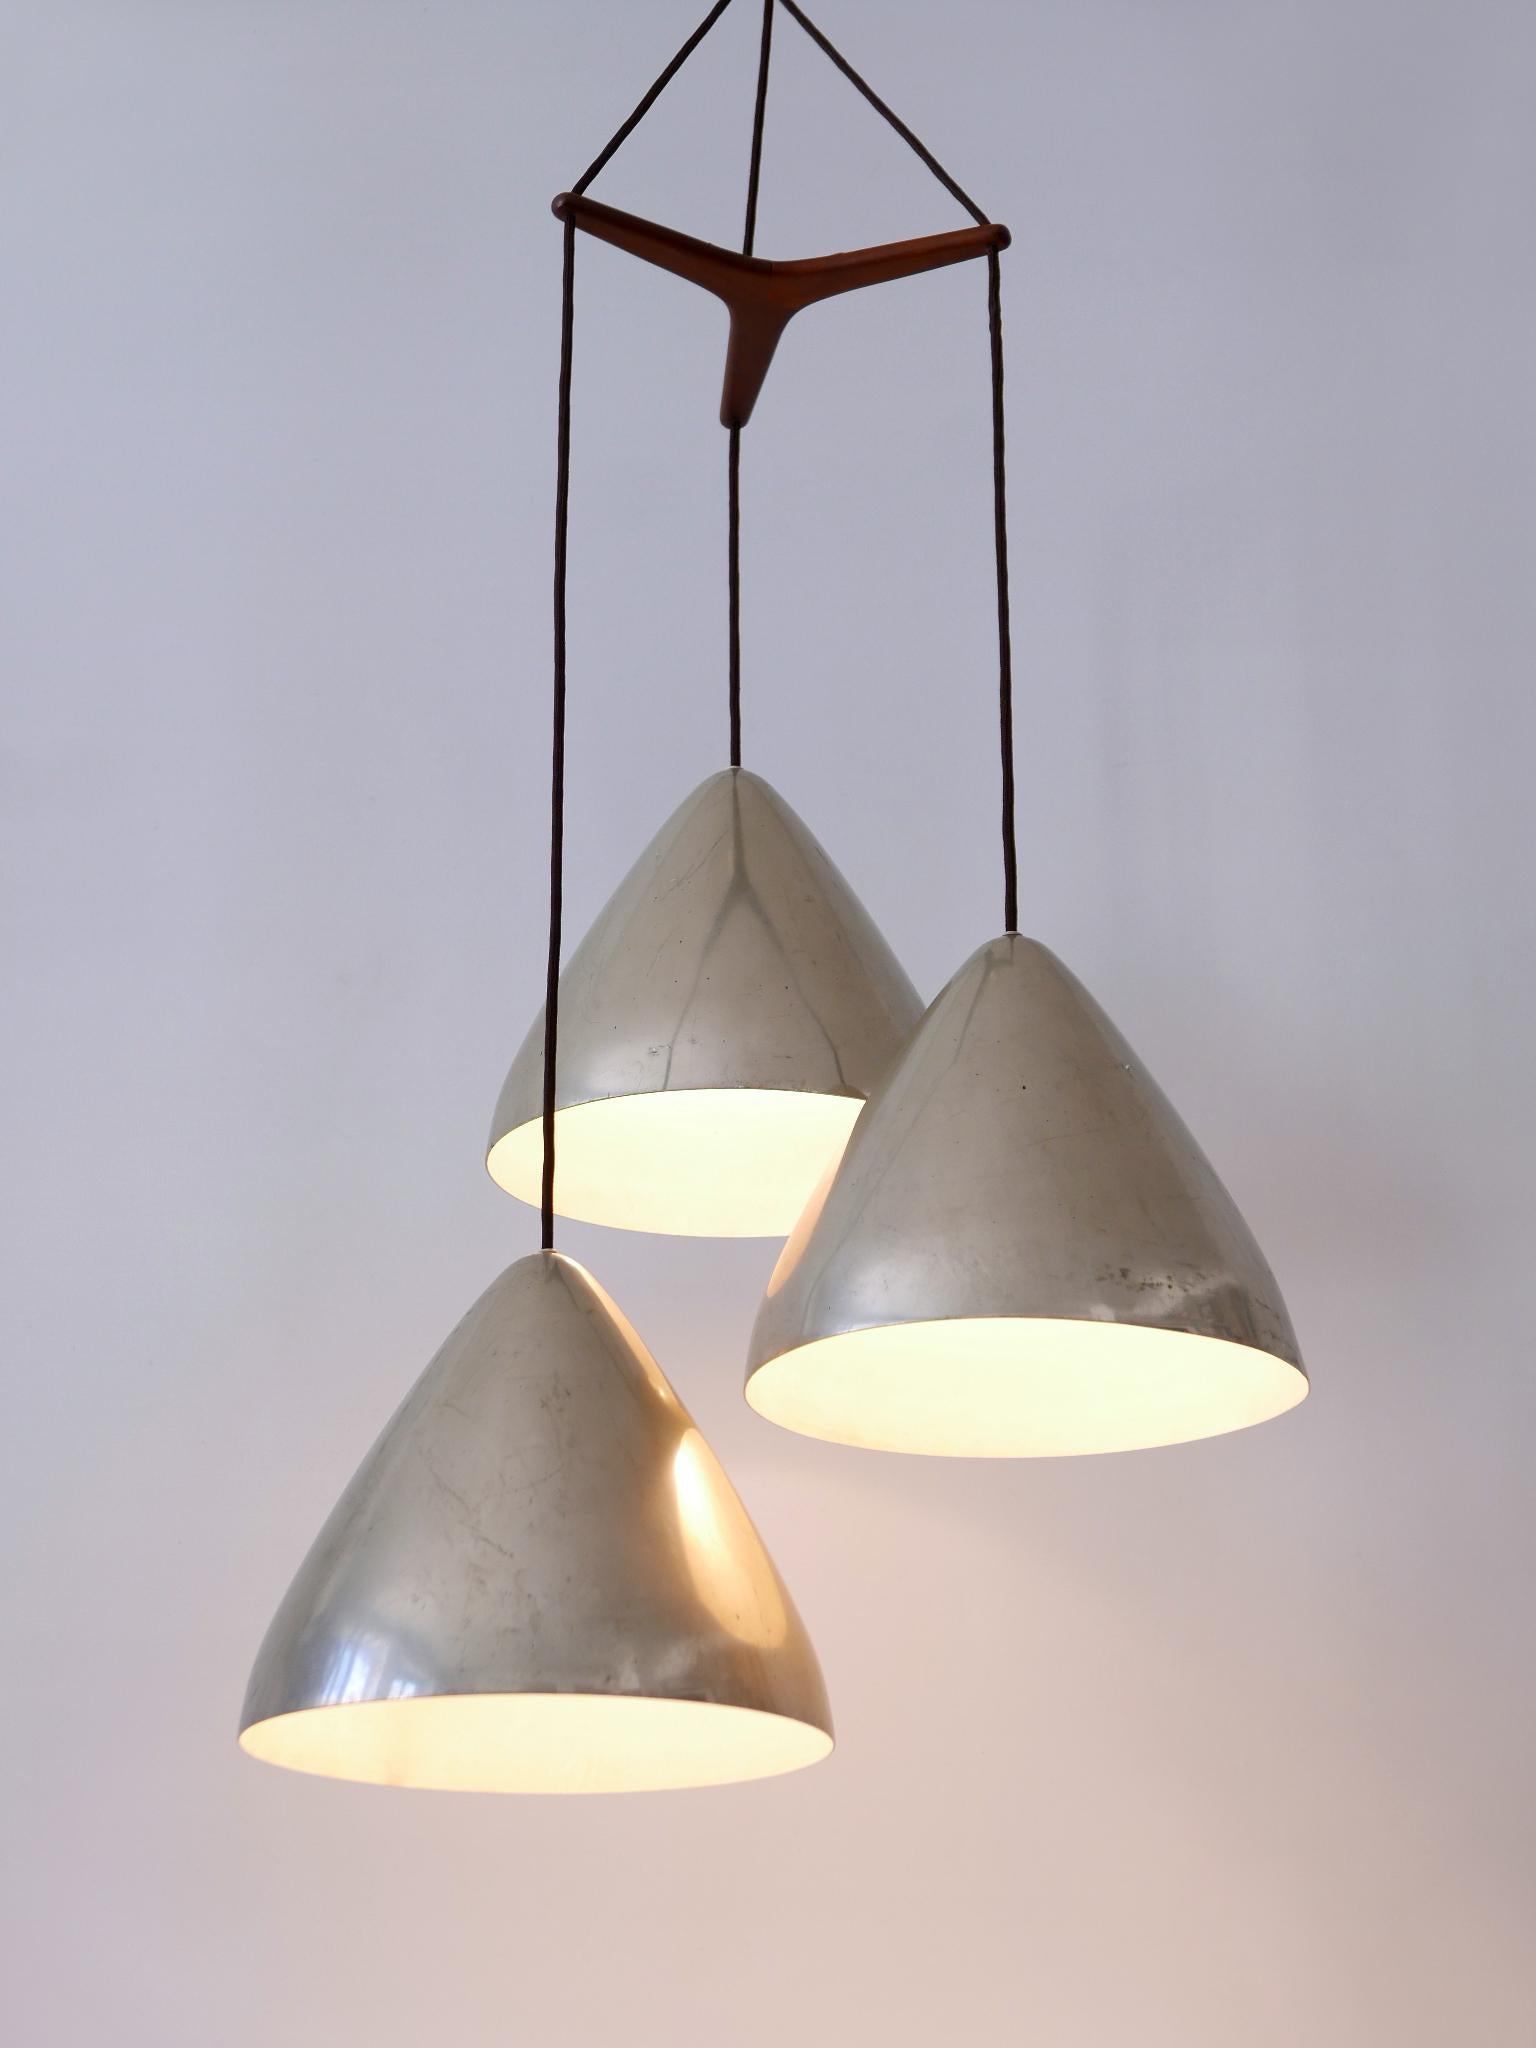 Elegant Cascading Pendant Lamp by Lisa Johansson-Pape for Orno Finland 1960s For Sale 1